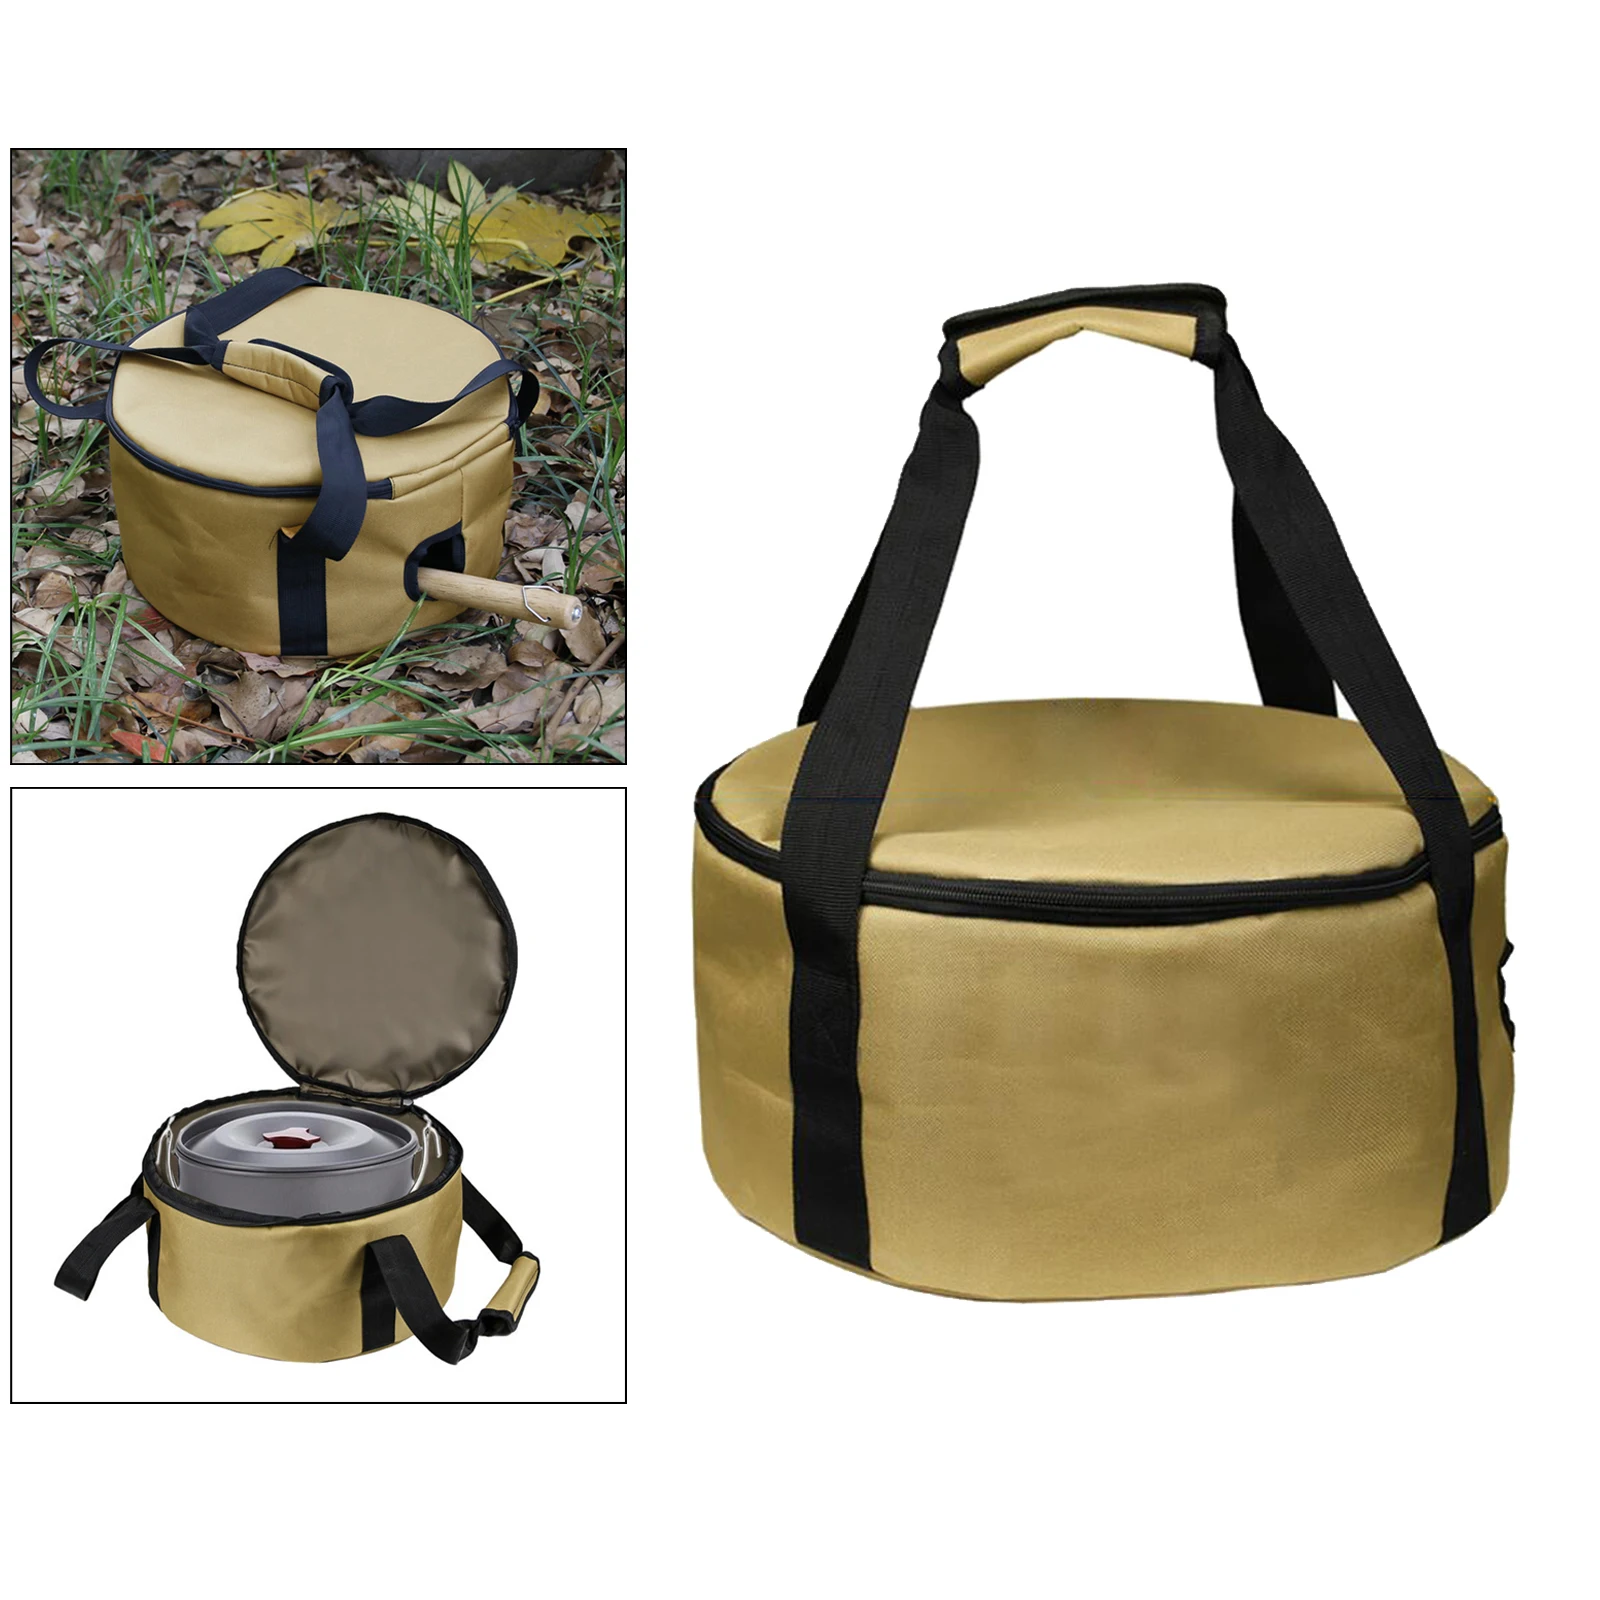 Camping Cookware Carrying Bag Kitchen Utensil Organizer Picnic Travel Portable BBQ Cookware Pan Pot Storage Bag Pouch